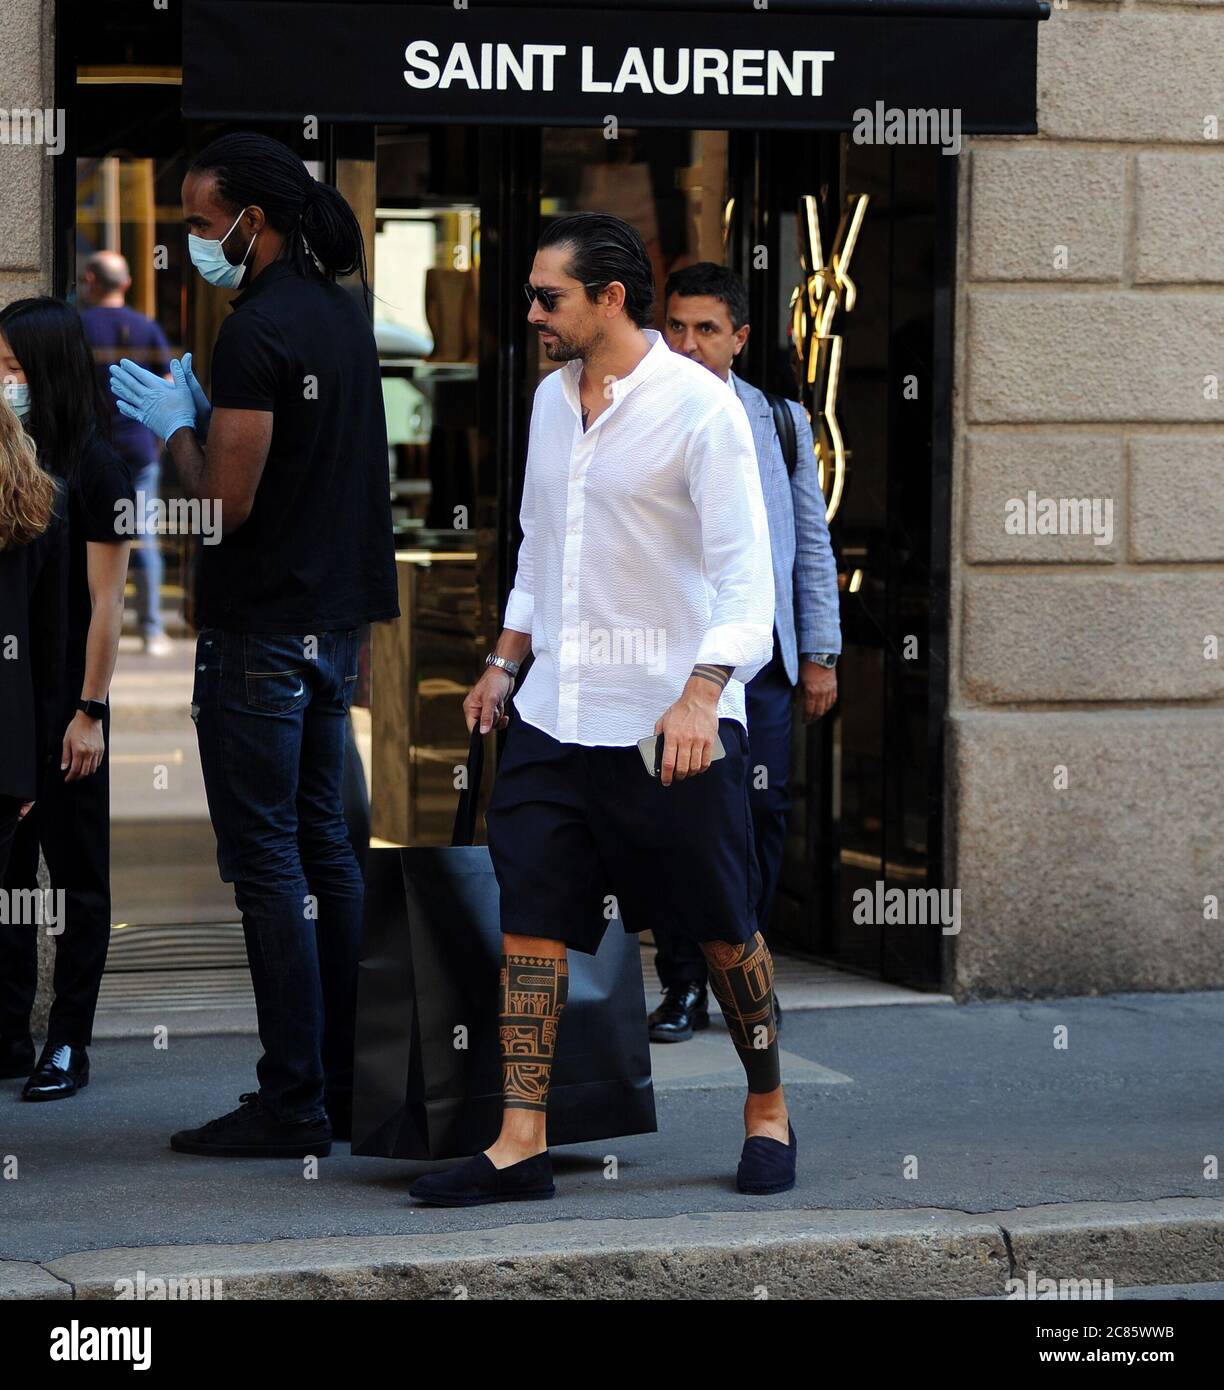 Milan, Marco Borriello shopping in the center Marco Borriello, recently  photographed together with Marica Pellegrinelli, ex-wife of Eros  Ramazzotti, arrives in the center for shopping. Enter the "SAINT LAURENT"  boutique in via